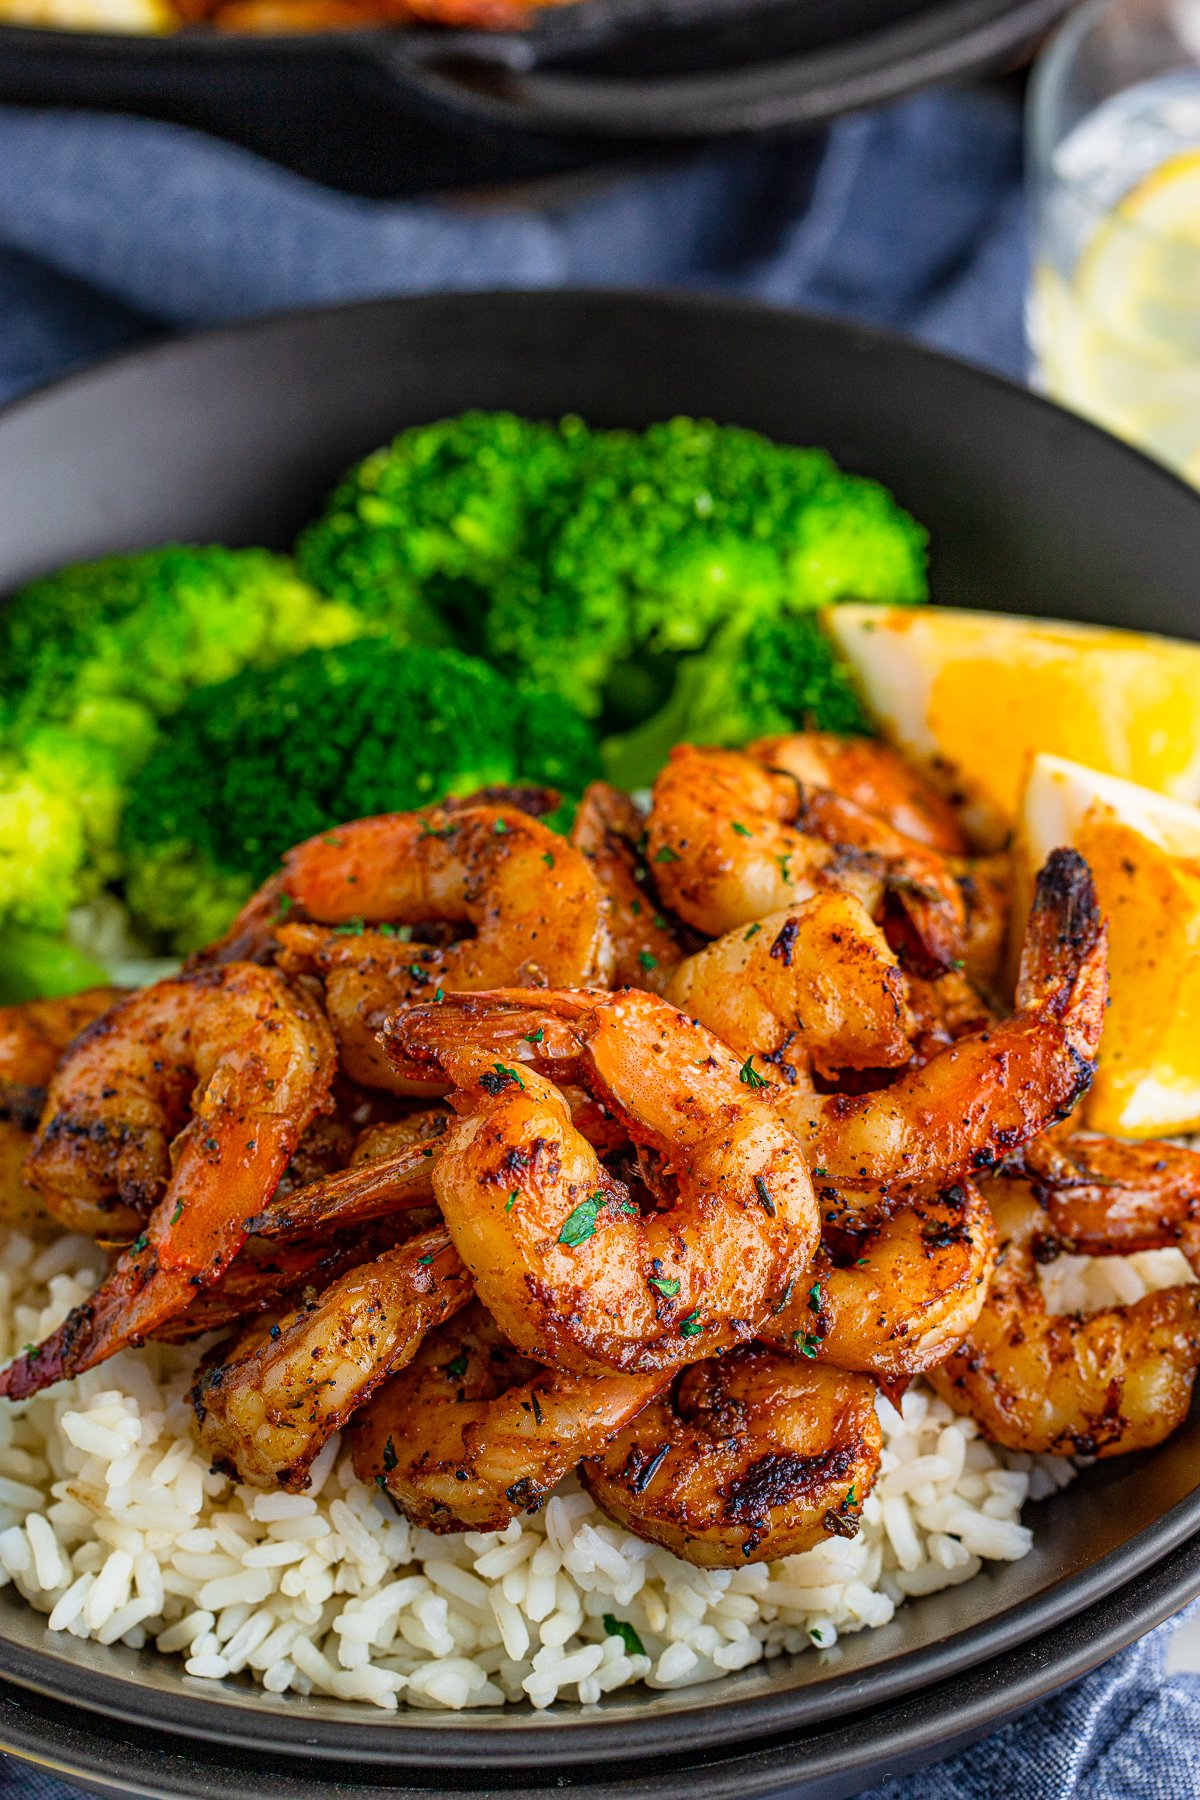 Blackened Shrimp over rice on plate with broccoli and lemon